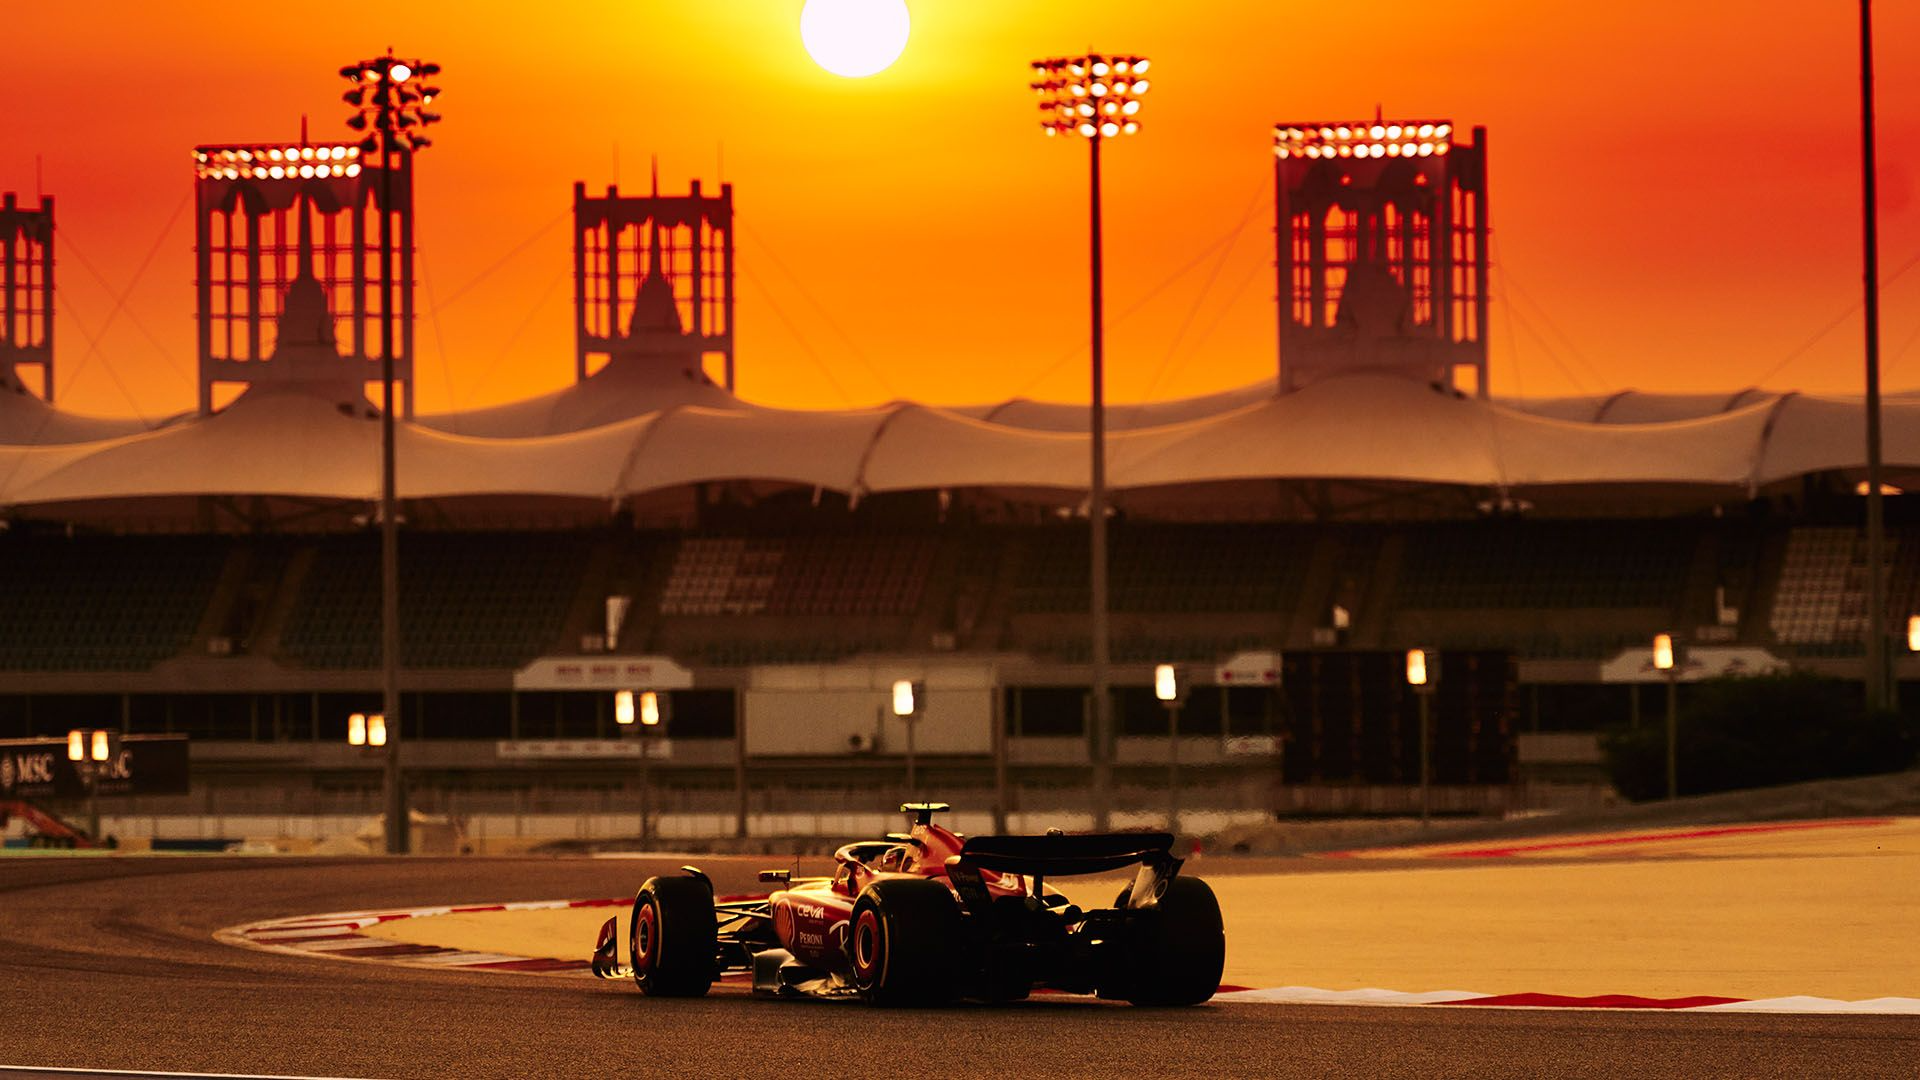 A Ferrari being driven at Bahrain in the sunset